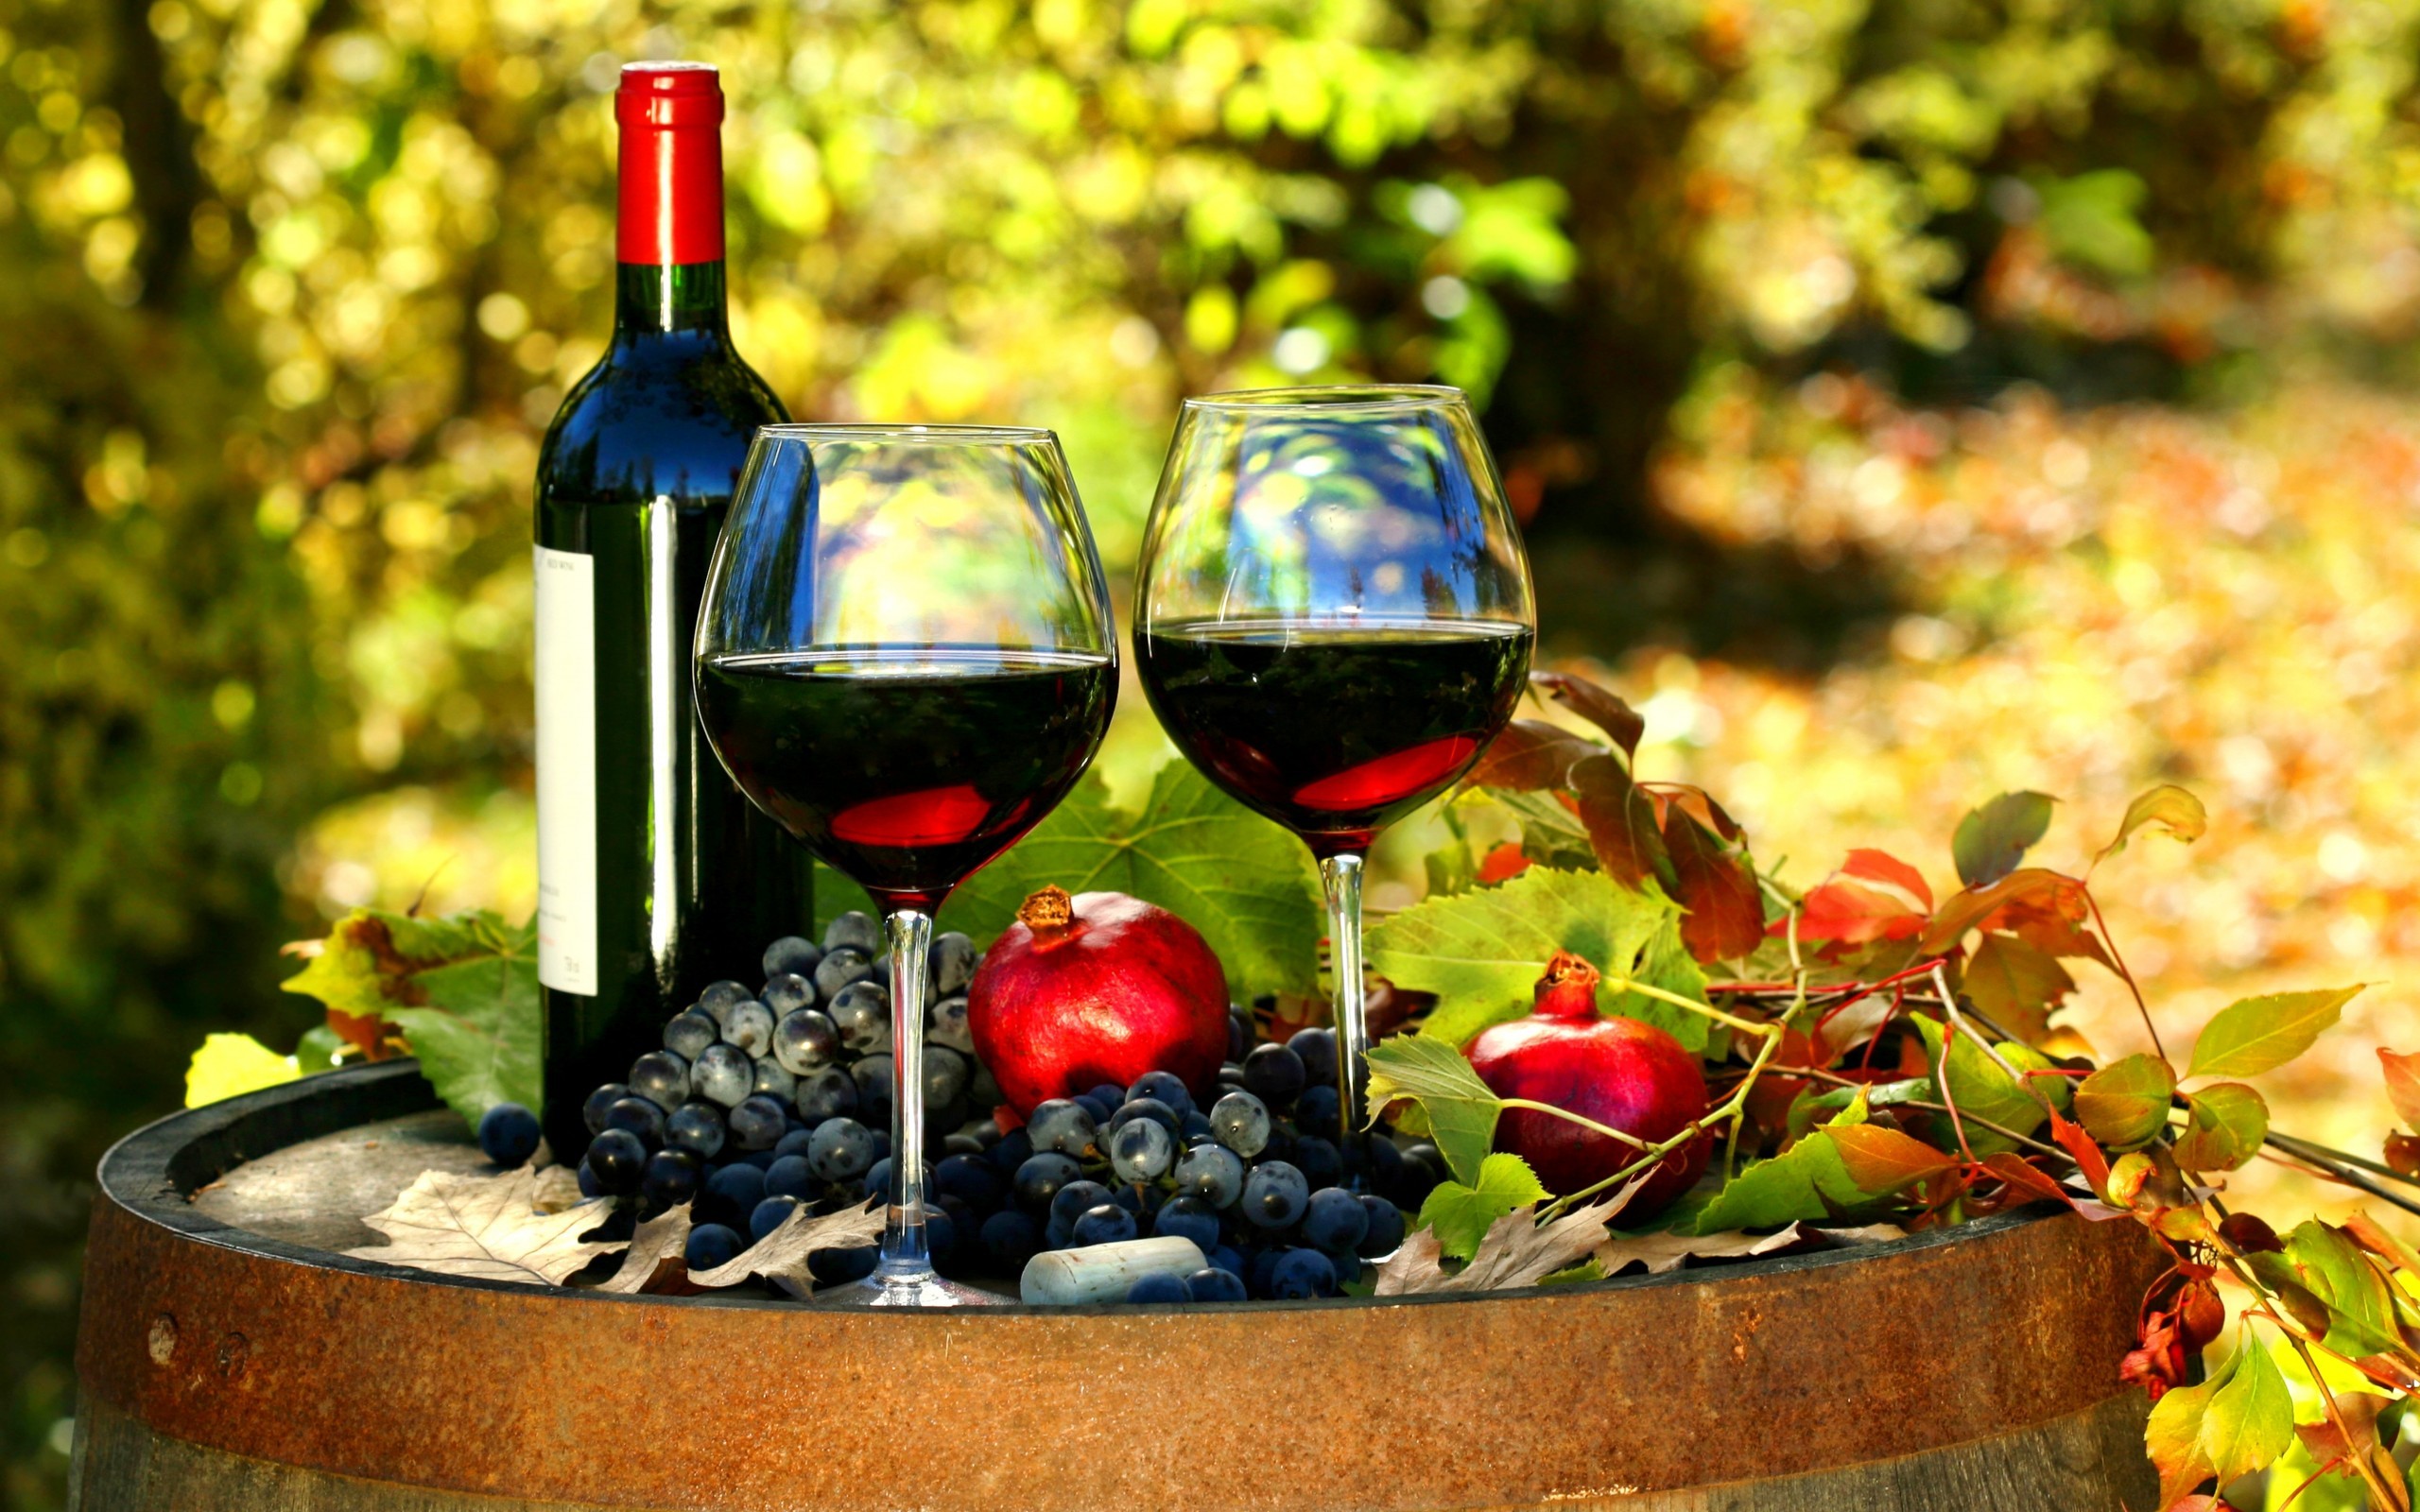 General 2560x1600 wine drink red wine fruit grapes drinking glass still life food berries plants